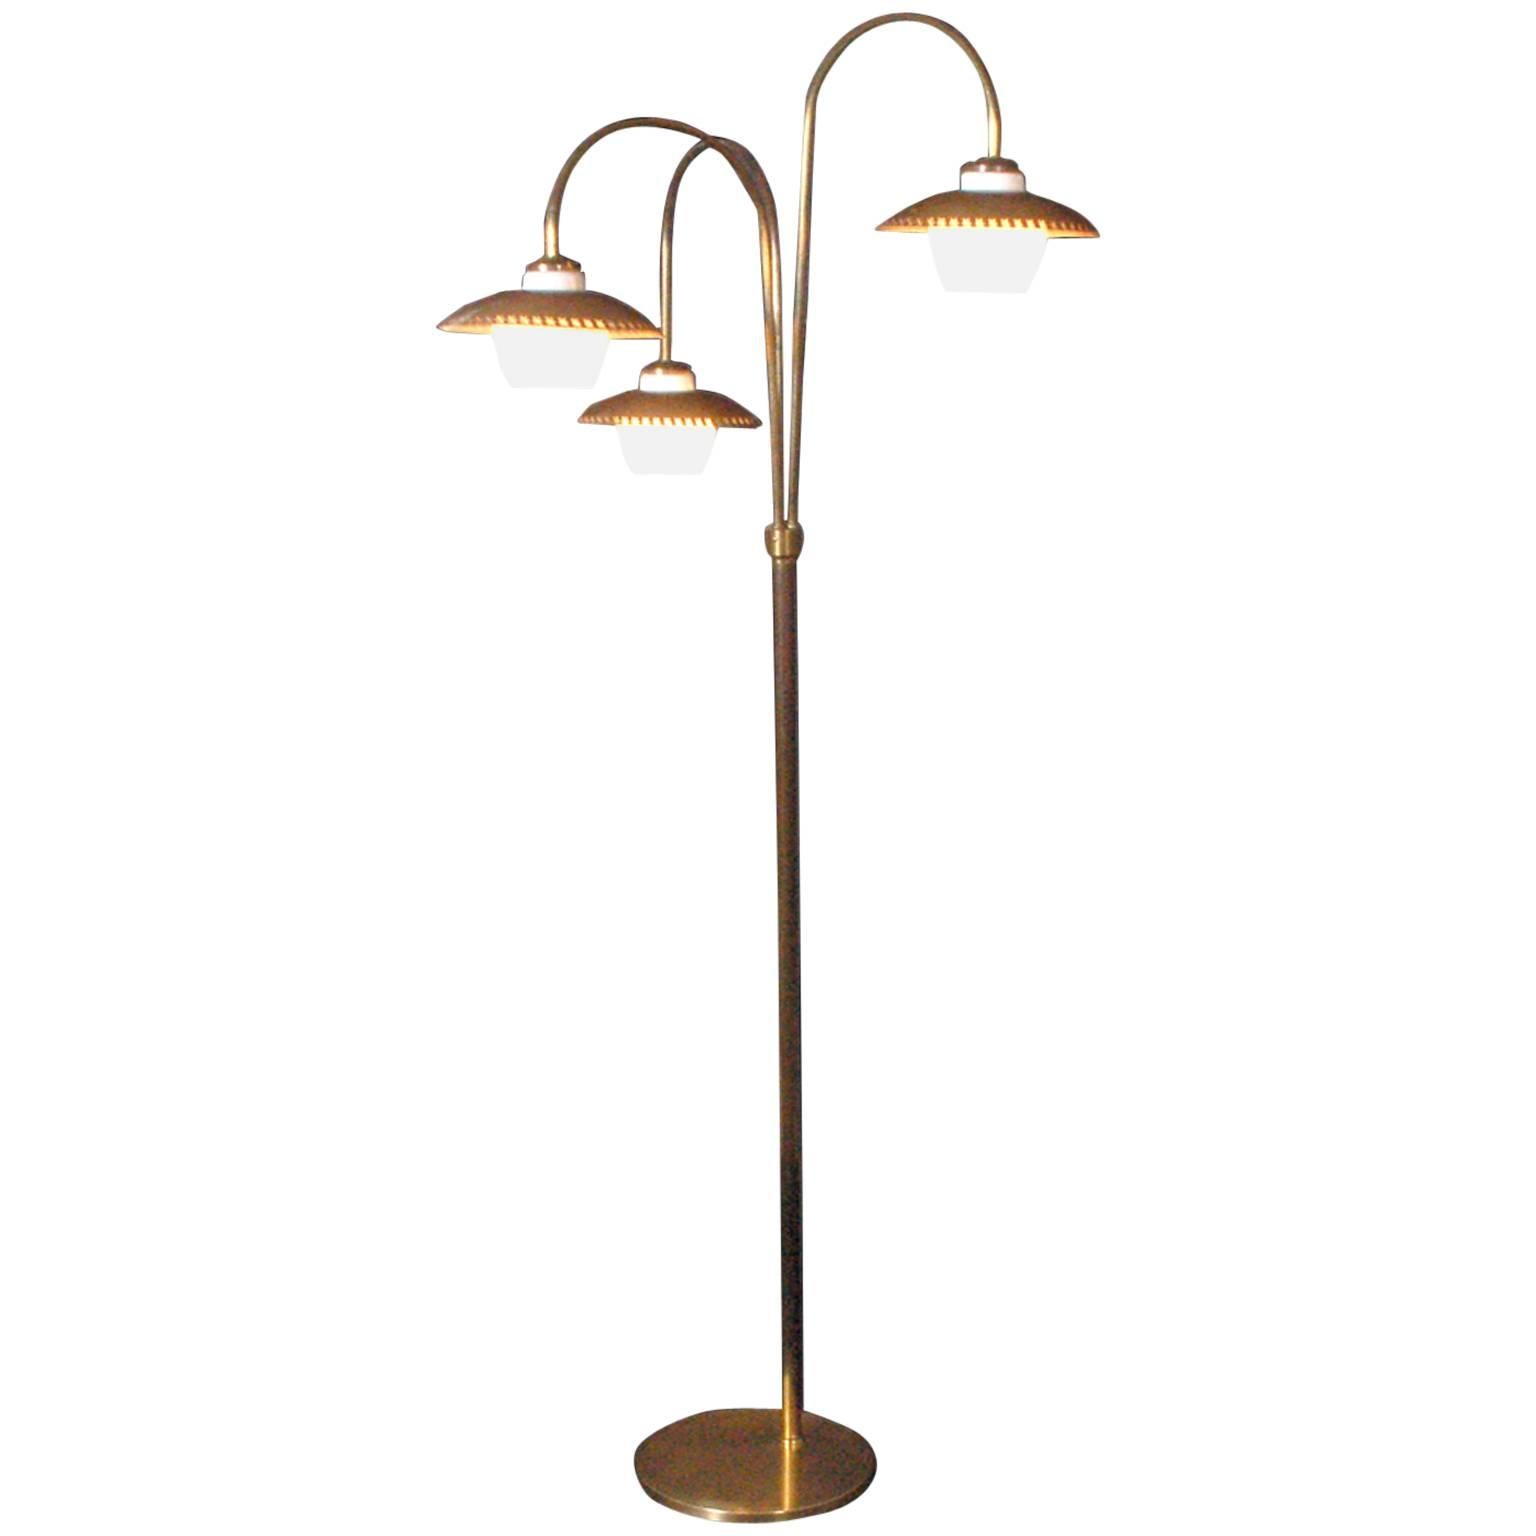 Floor Lamp Attributed to Bent Karlby